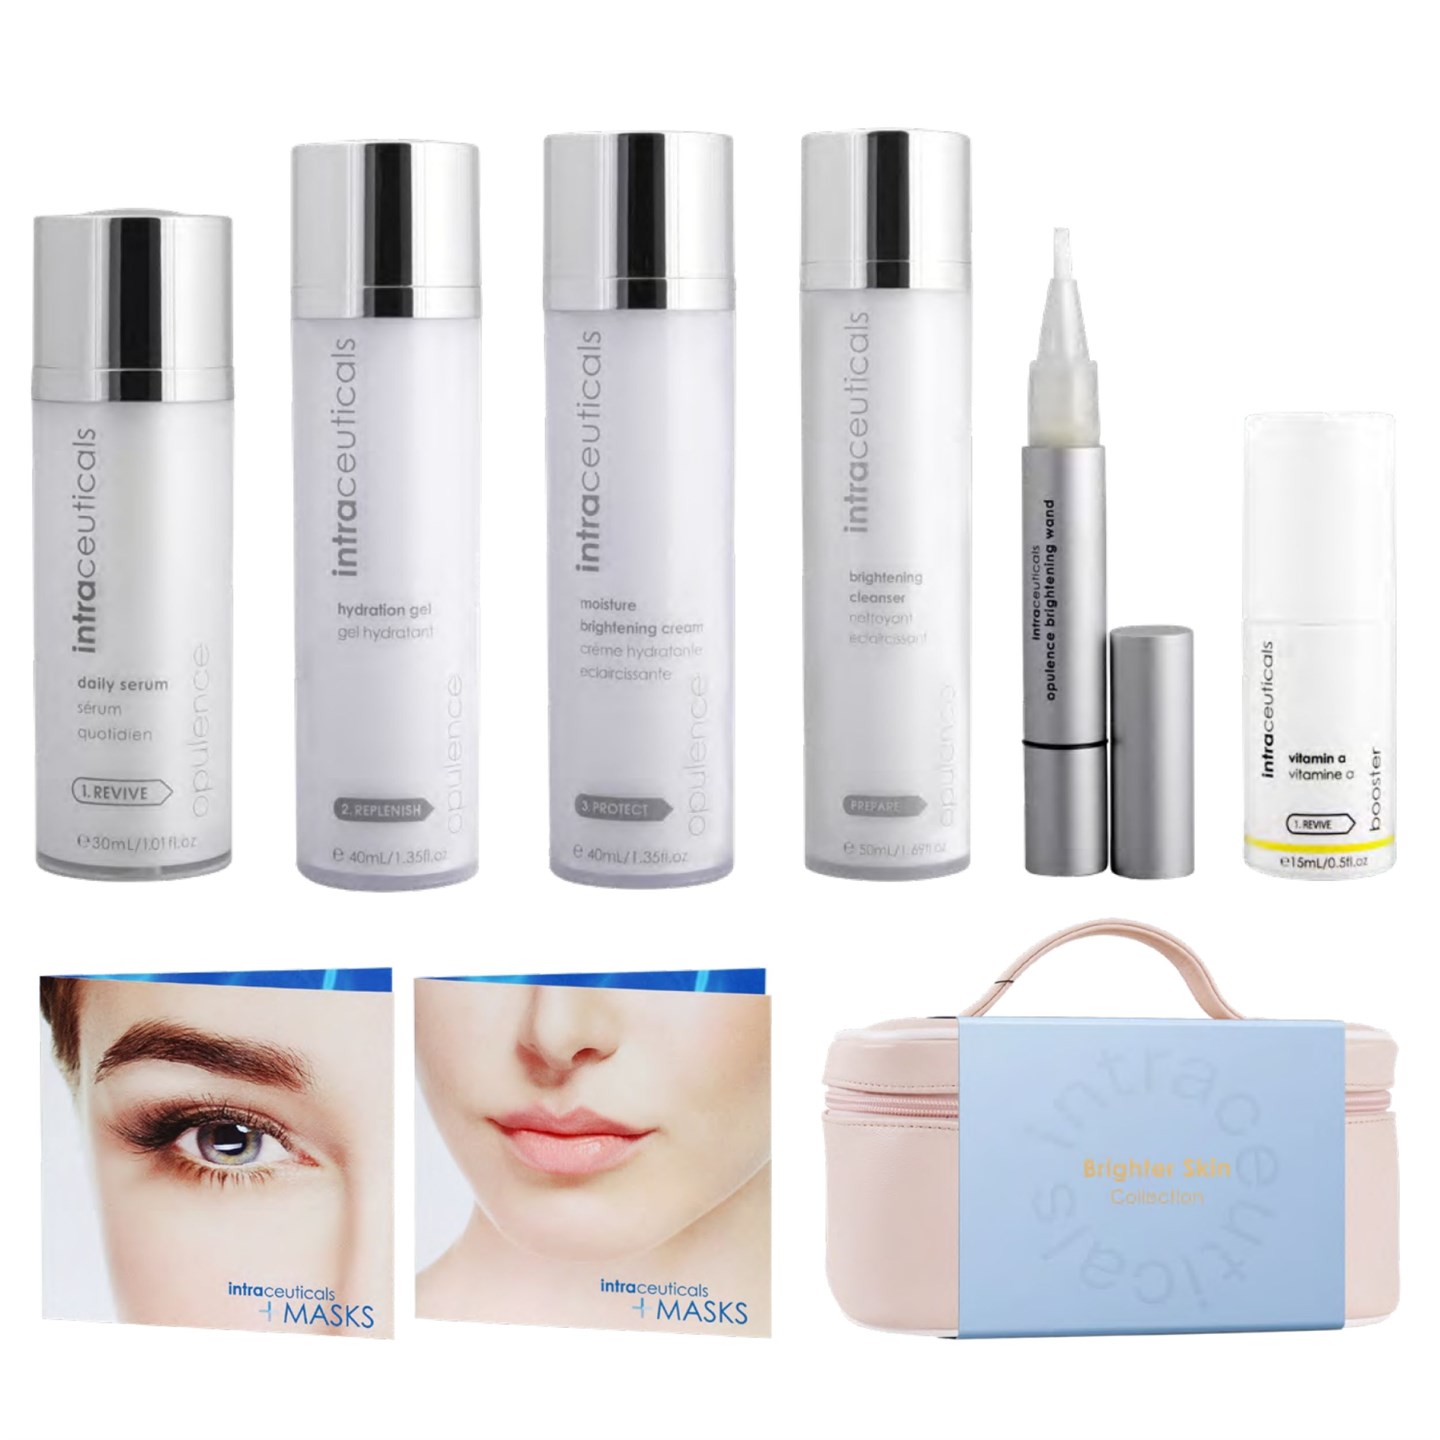 Intraceuticals Brighter Skin Luxury Collection